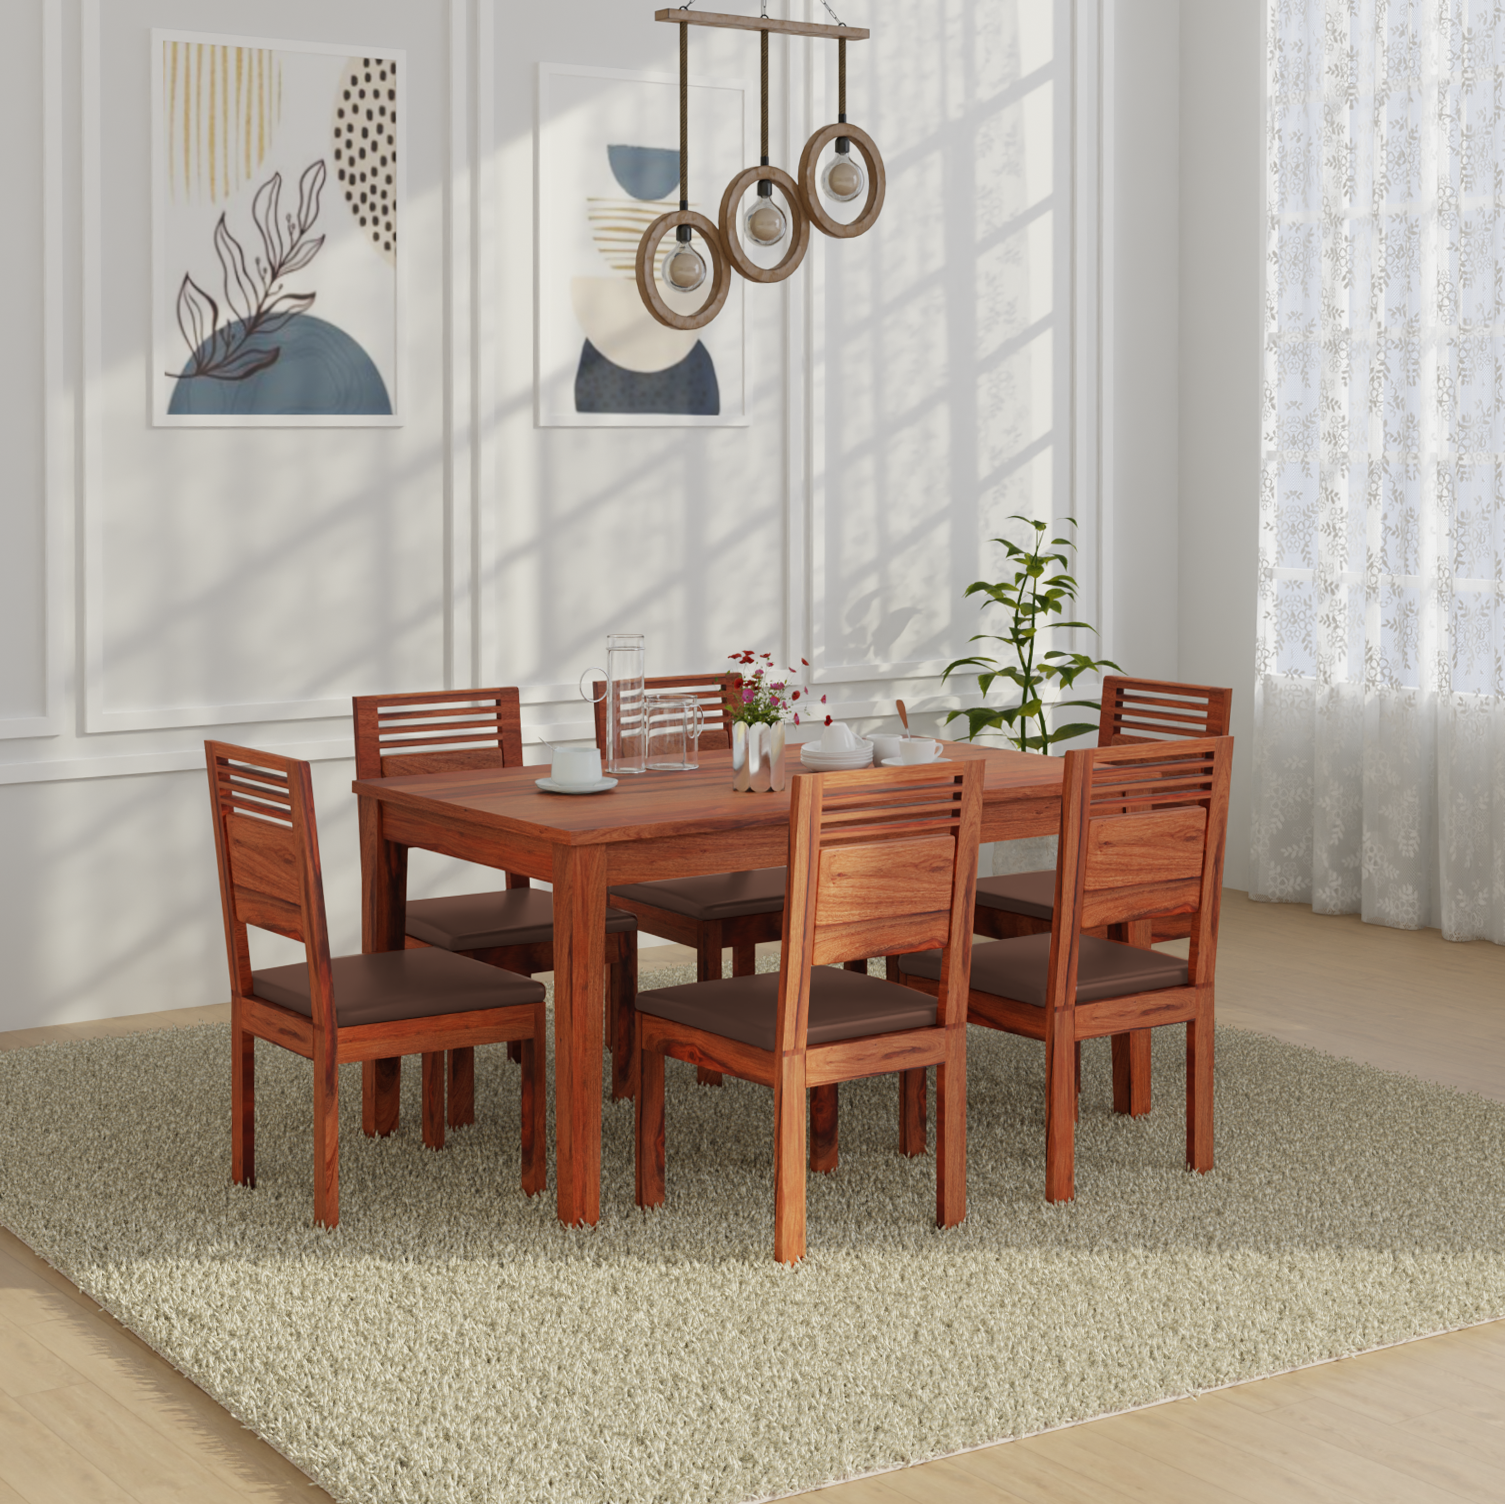 Velour Sheesham wood dining set in Reddish walnut Color with 6 Seating